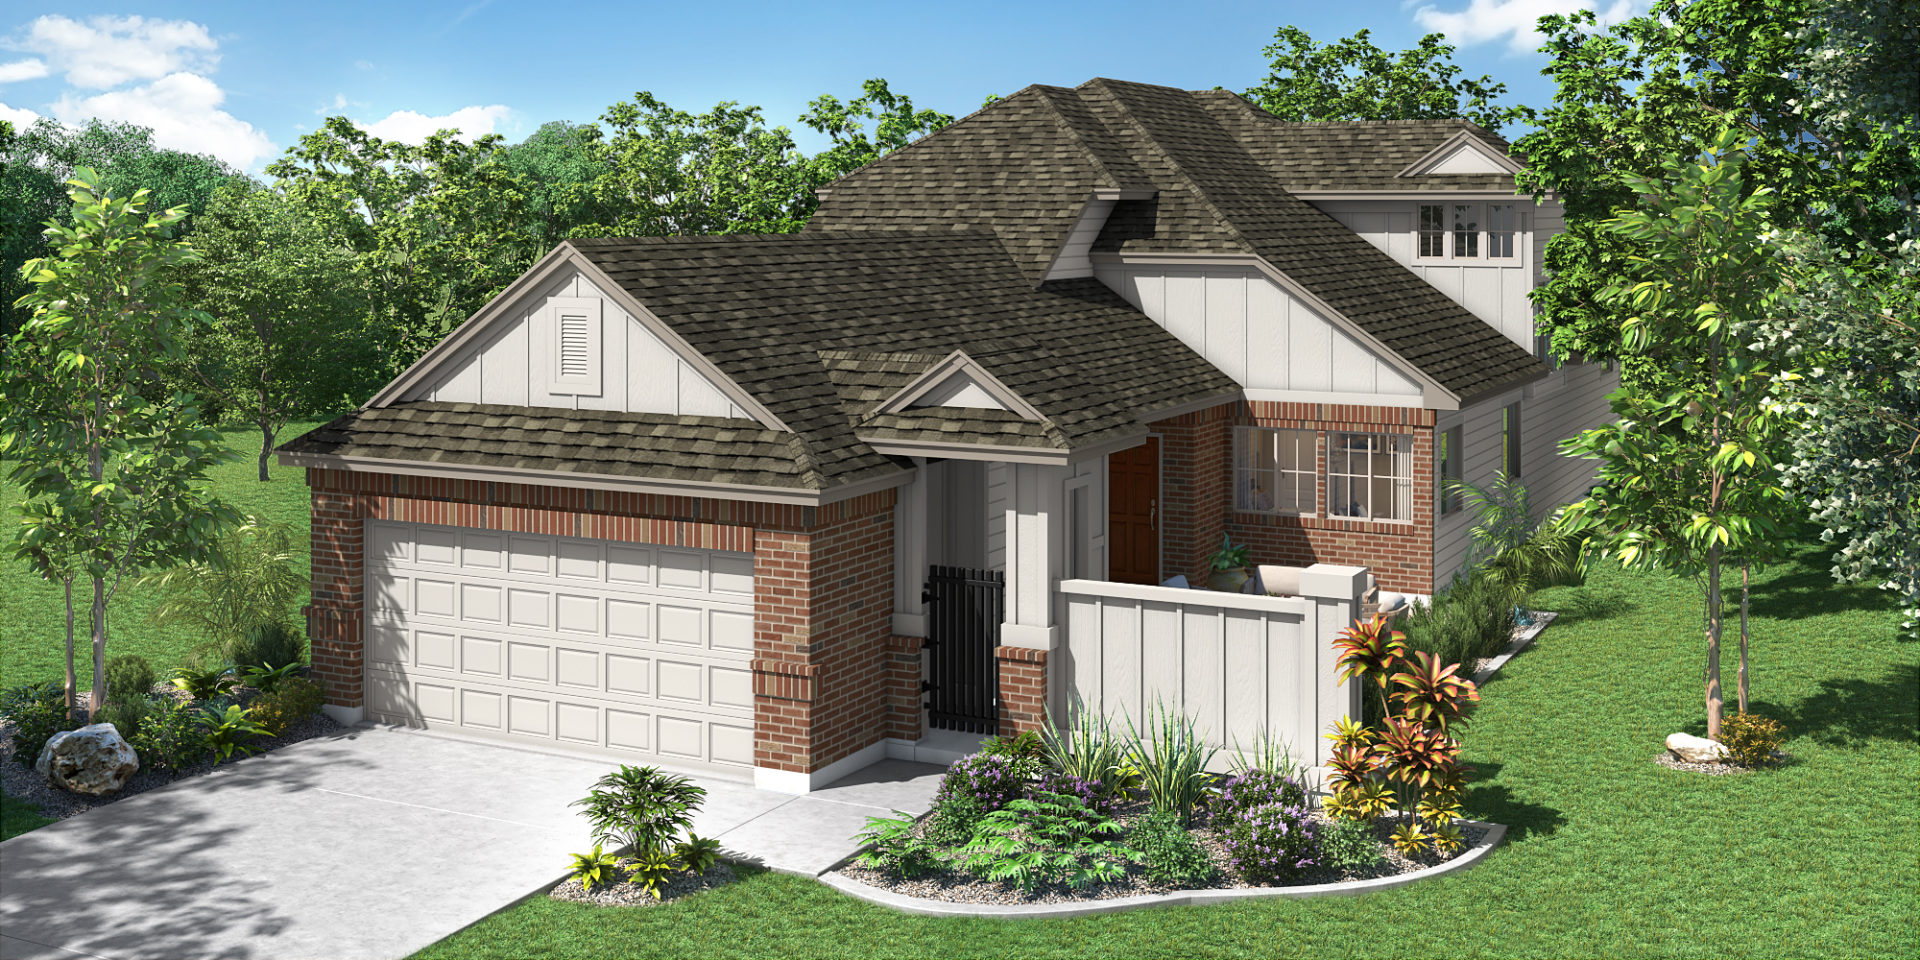  Enclave at Meadow Run - Model Coming Soon! New Homes in Melissa